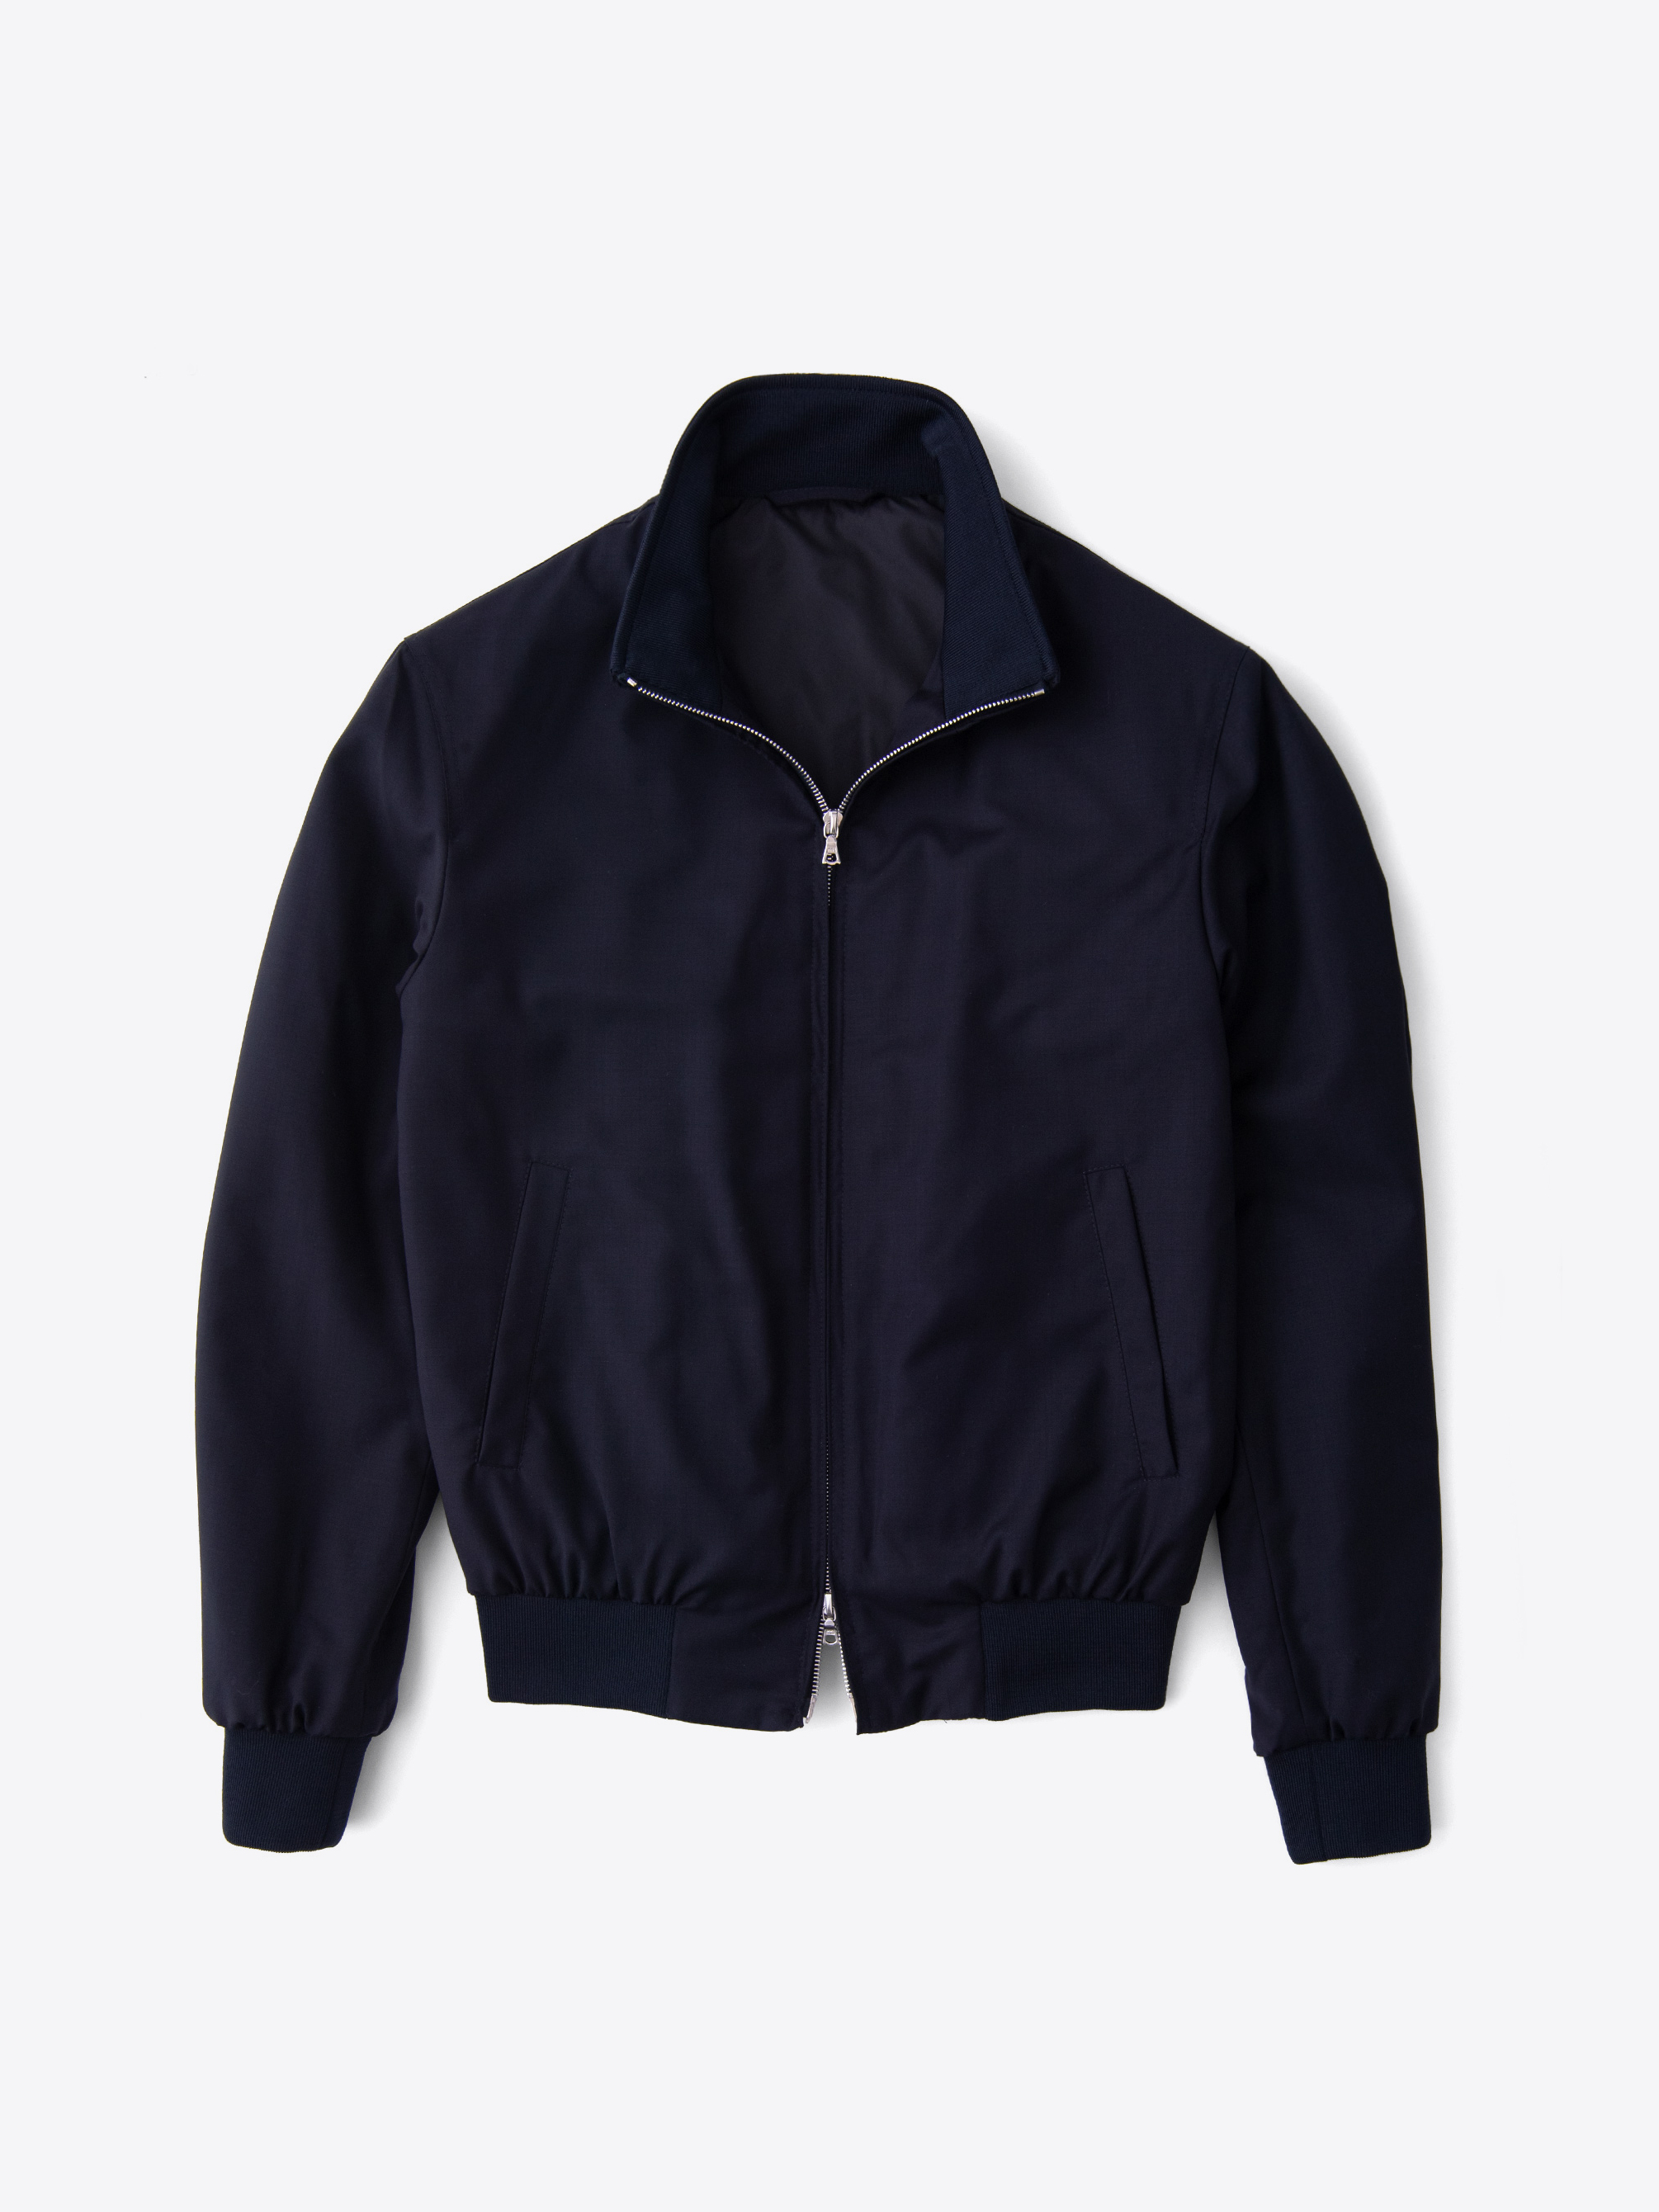 Zoom Image of Lucca Navy Performance Wool Jacket